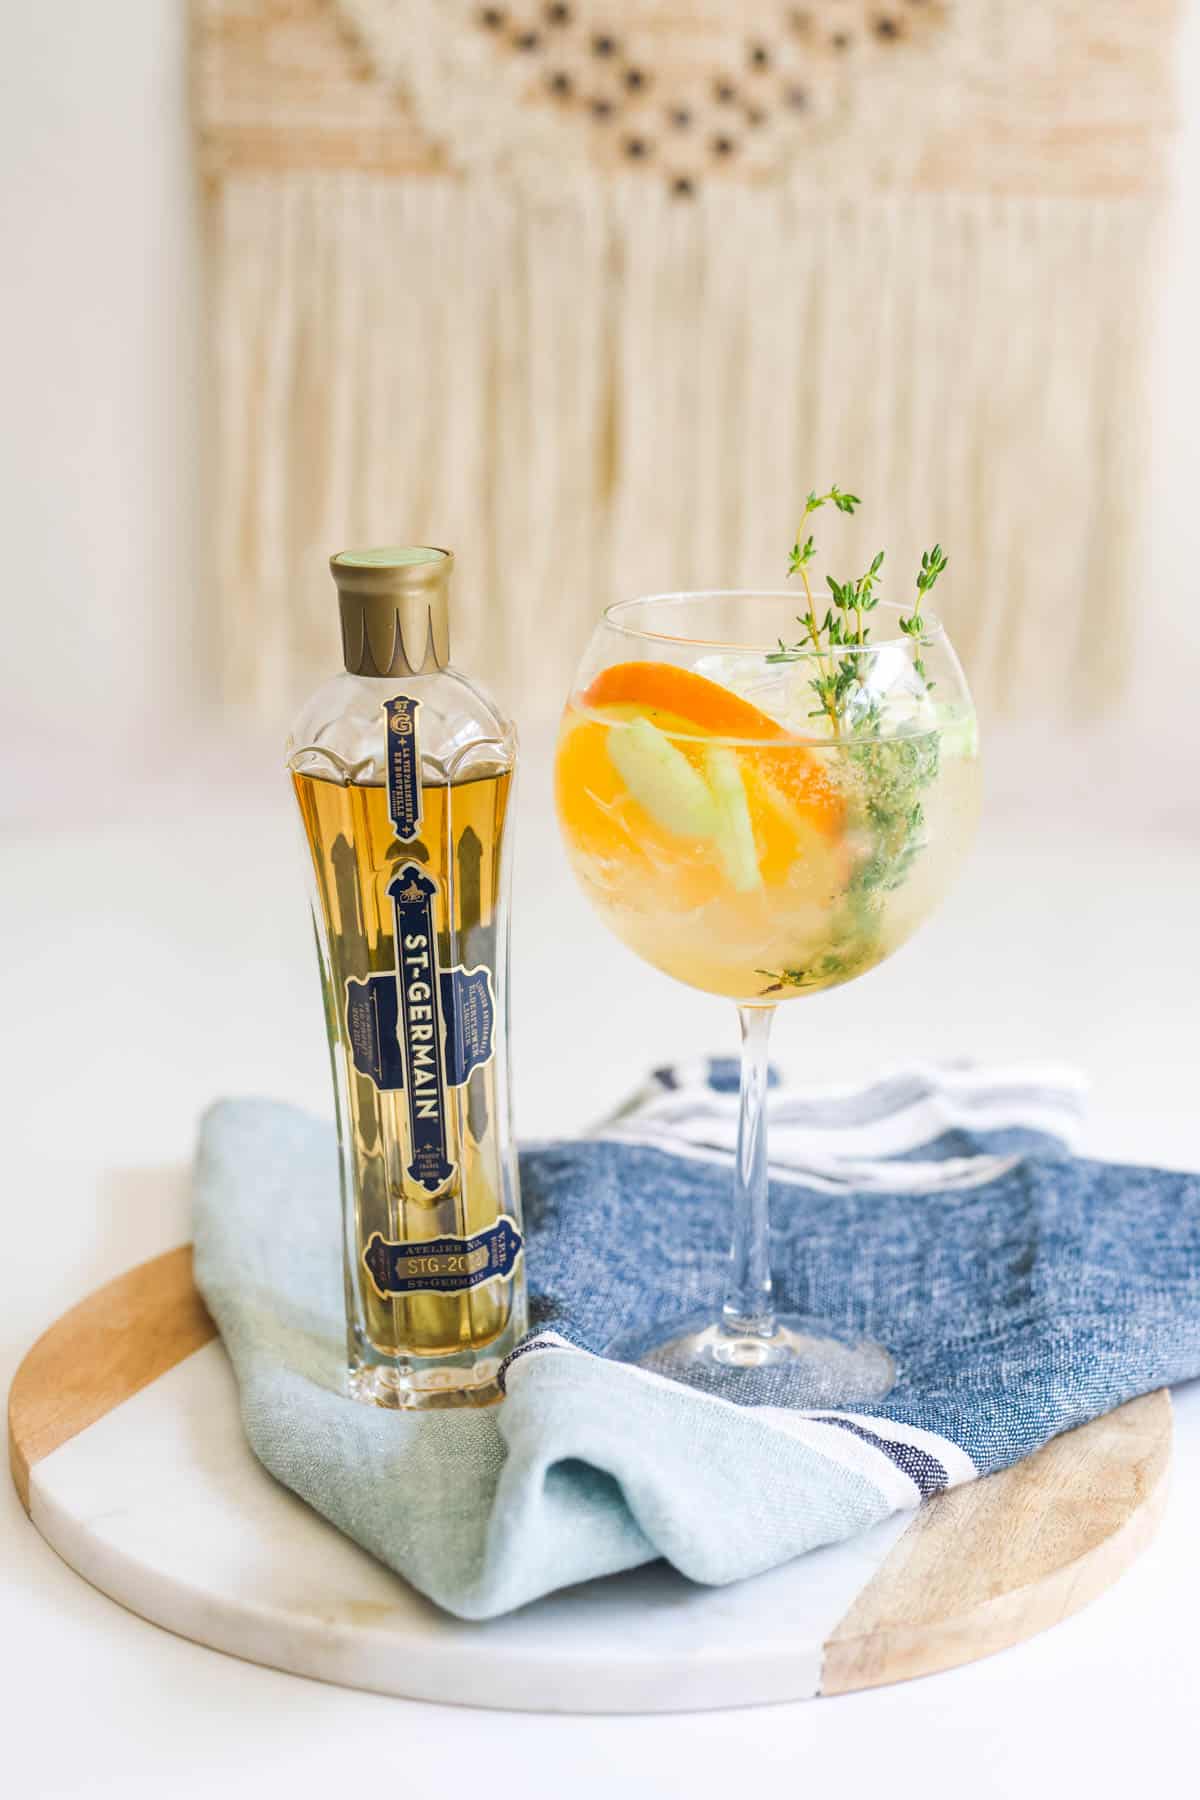 A Cointreau cocktail with cucumber and St Germain next to a bottle of St Germain, all on top of a marble and wood serving board with a blue towel.